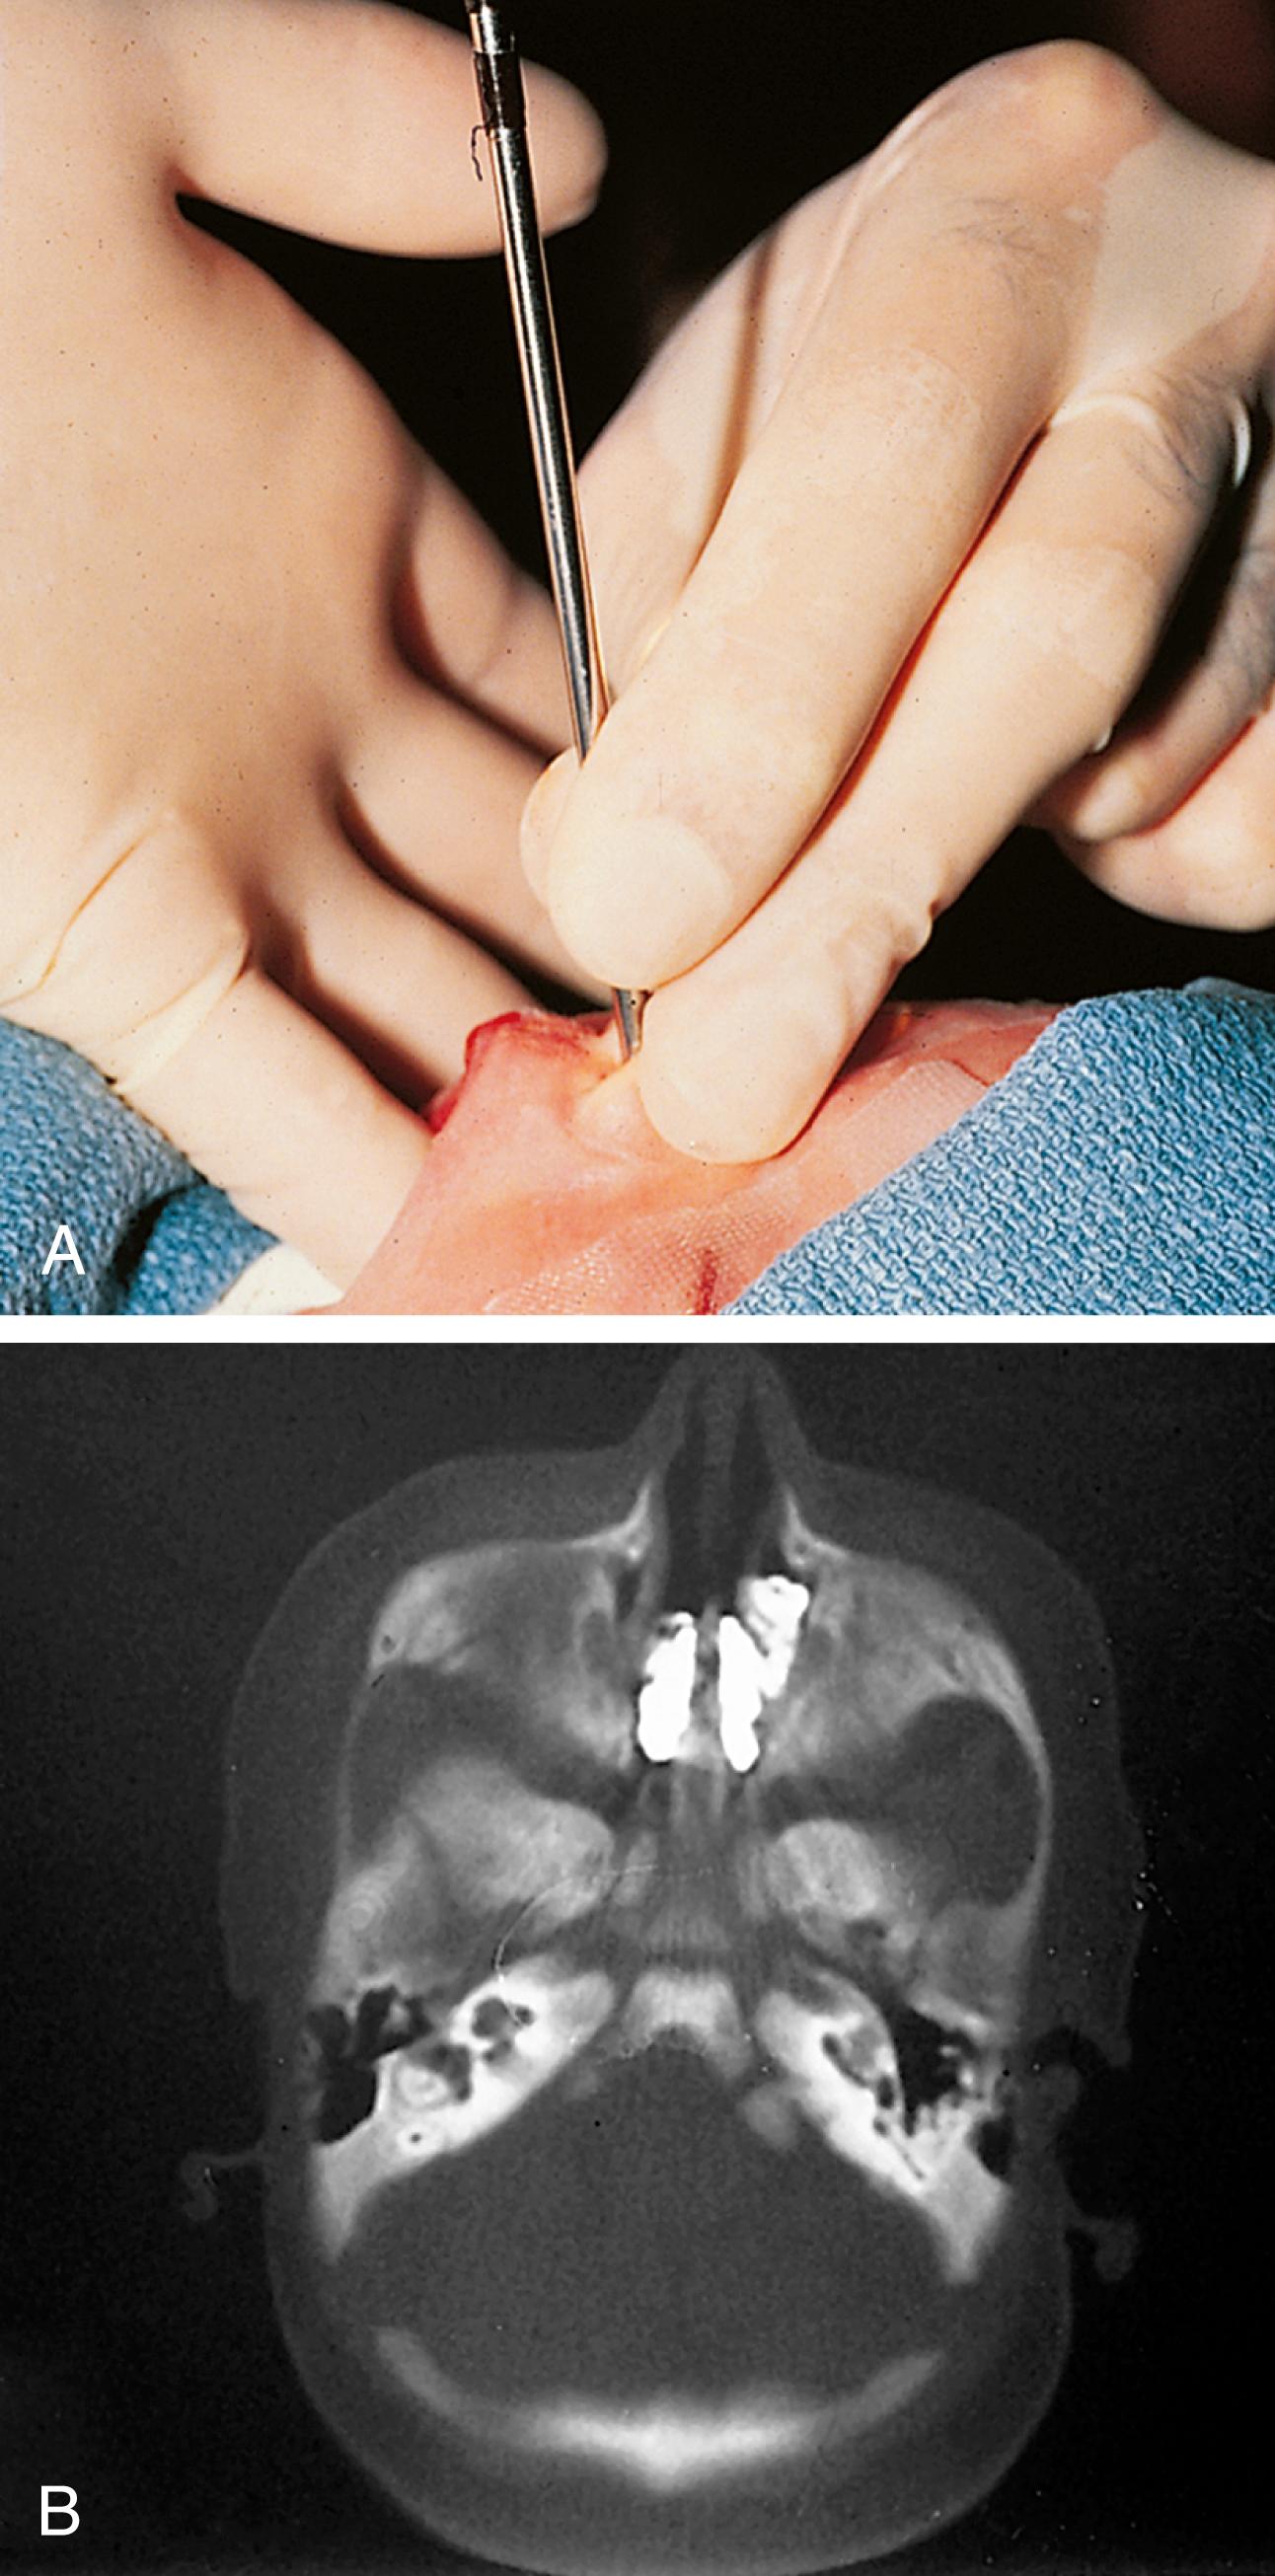 Fig. 24.35, Choanal atresia. (A) This infant manifested severe respiratory distress at delivery, with paradoxic cyanosis. Attempts to pass a urethral sound suggested bony obstruction of the choanae bilaterally. (B) A computed tomography (CT) scan done after instillation of radiopaque dye reveals pooling of the dye within the nose anterior to the choanae, confirming complete obstruction.